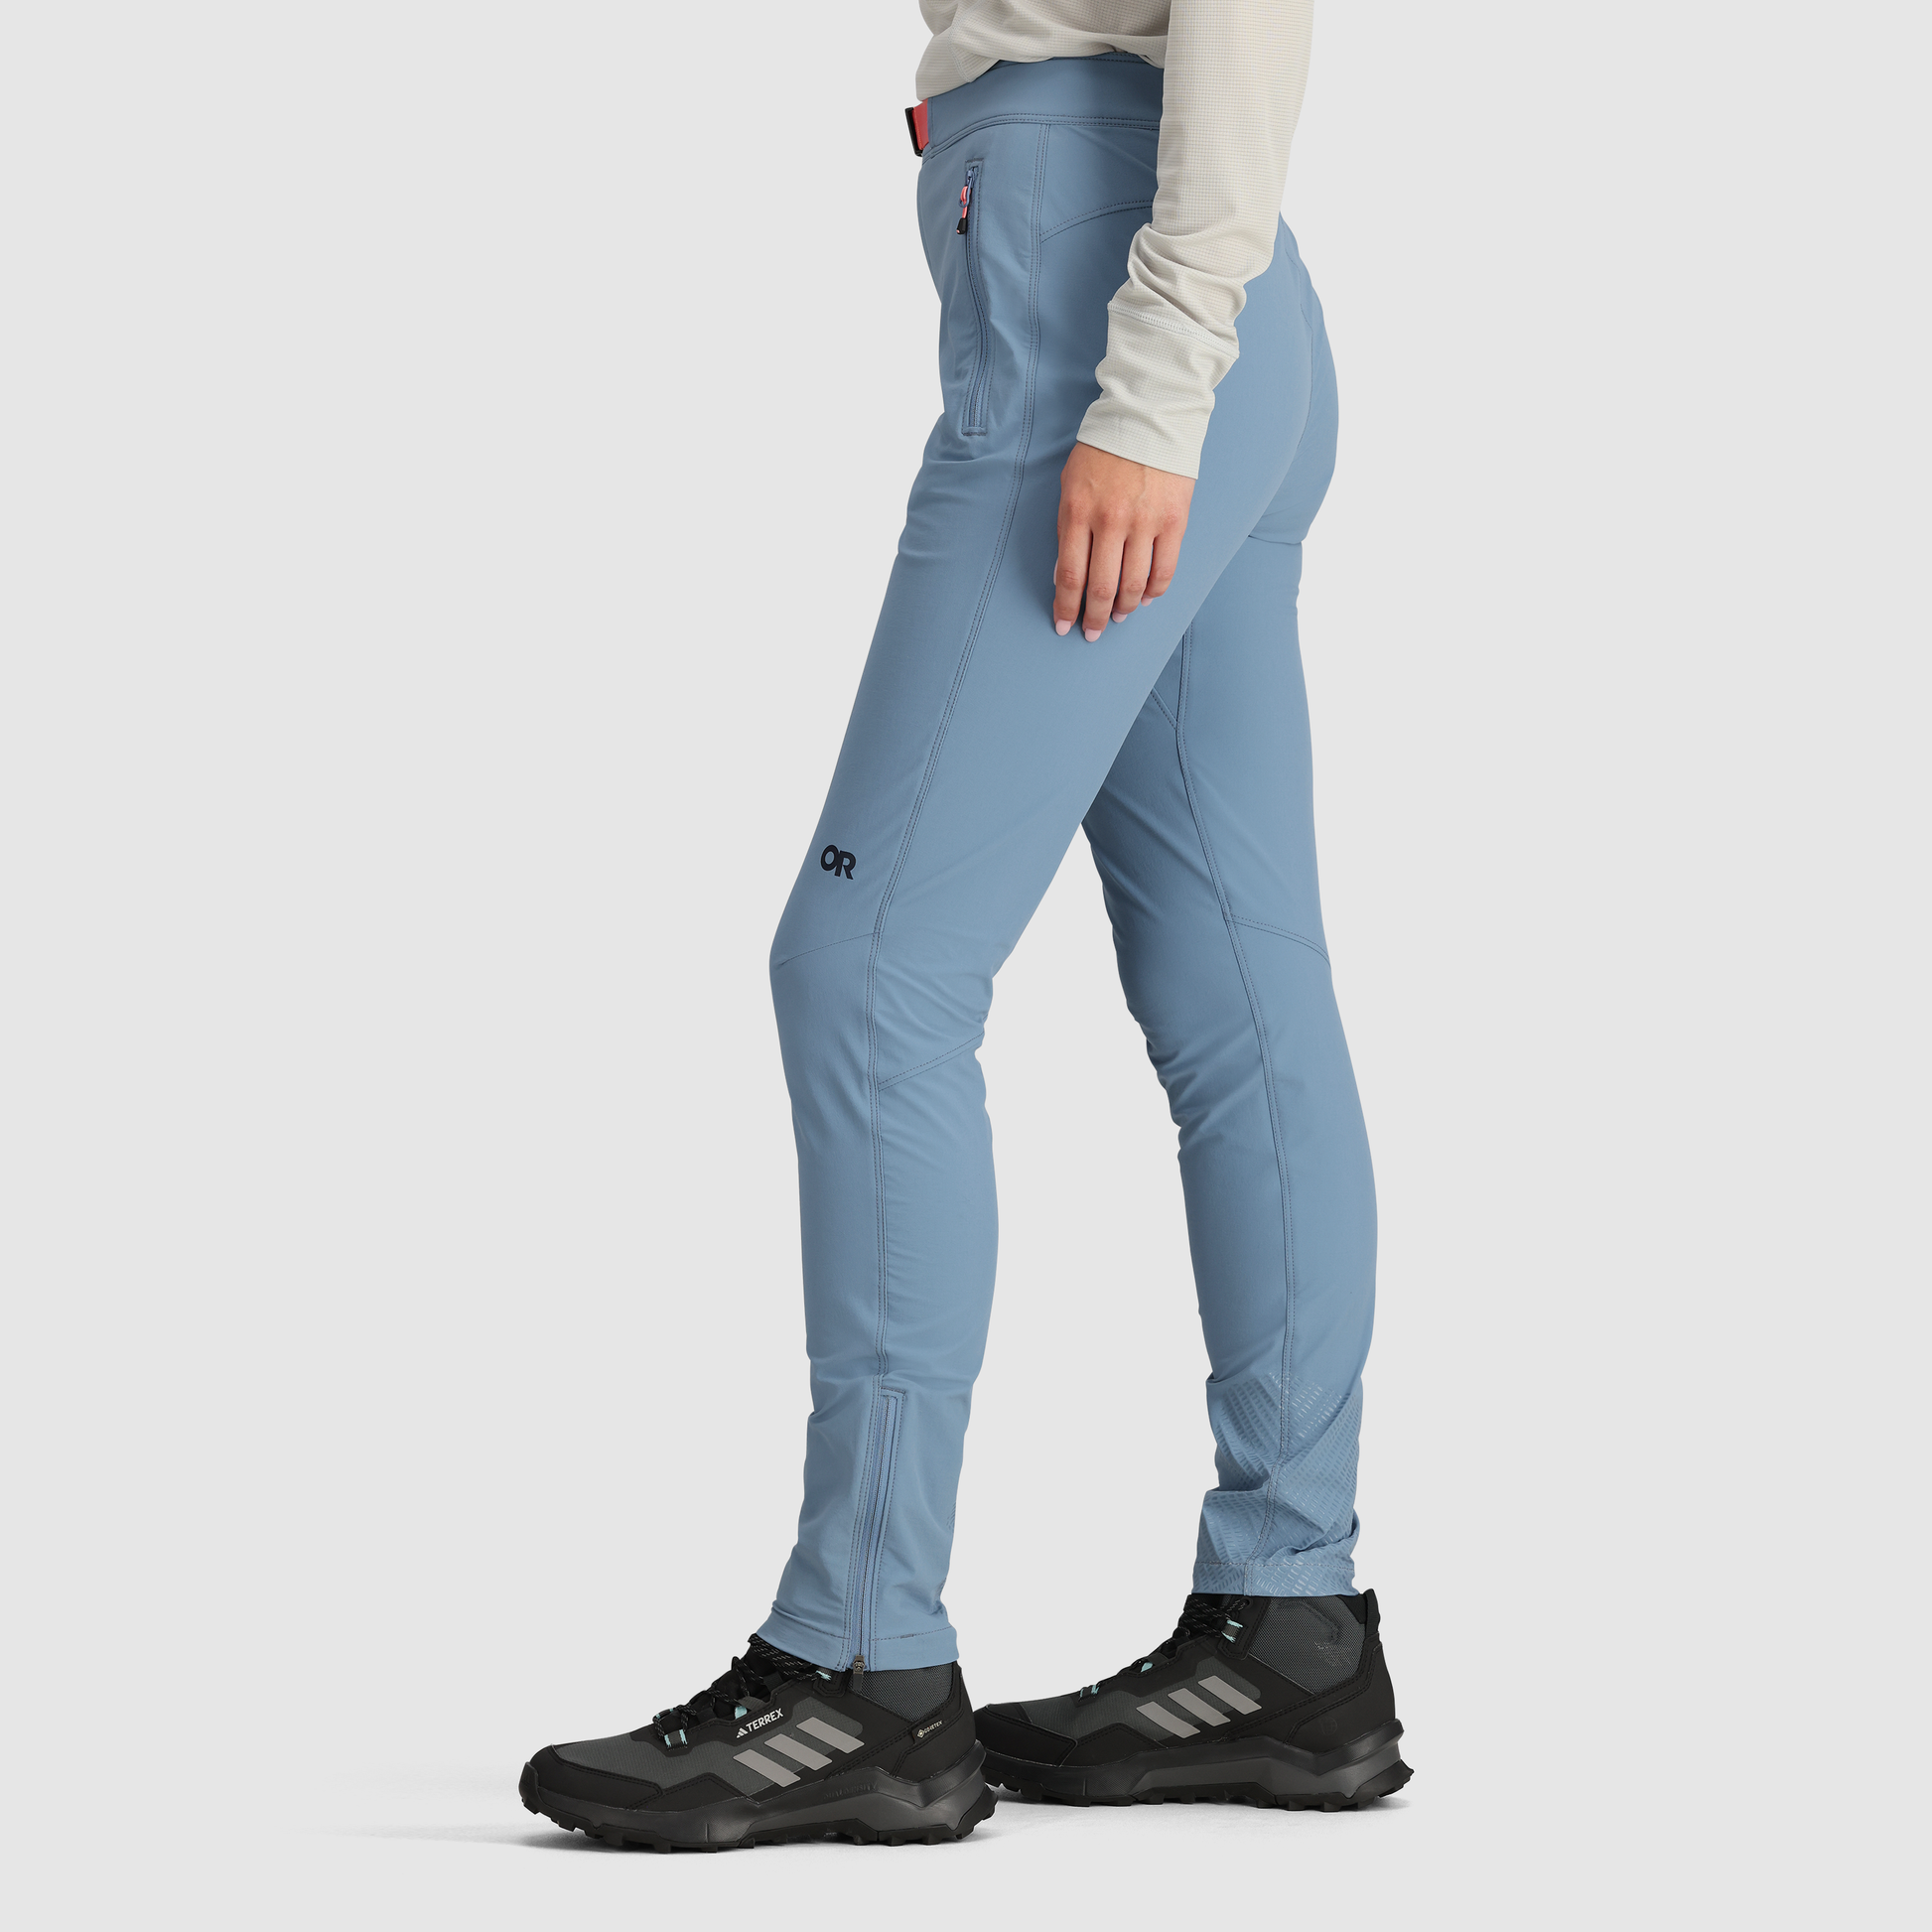 Women's Brevant Pants  Lightly insulated pants